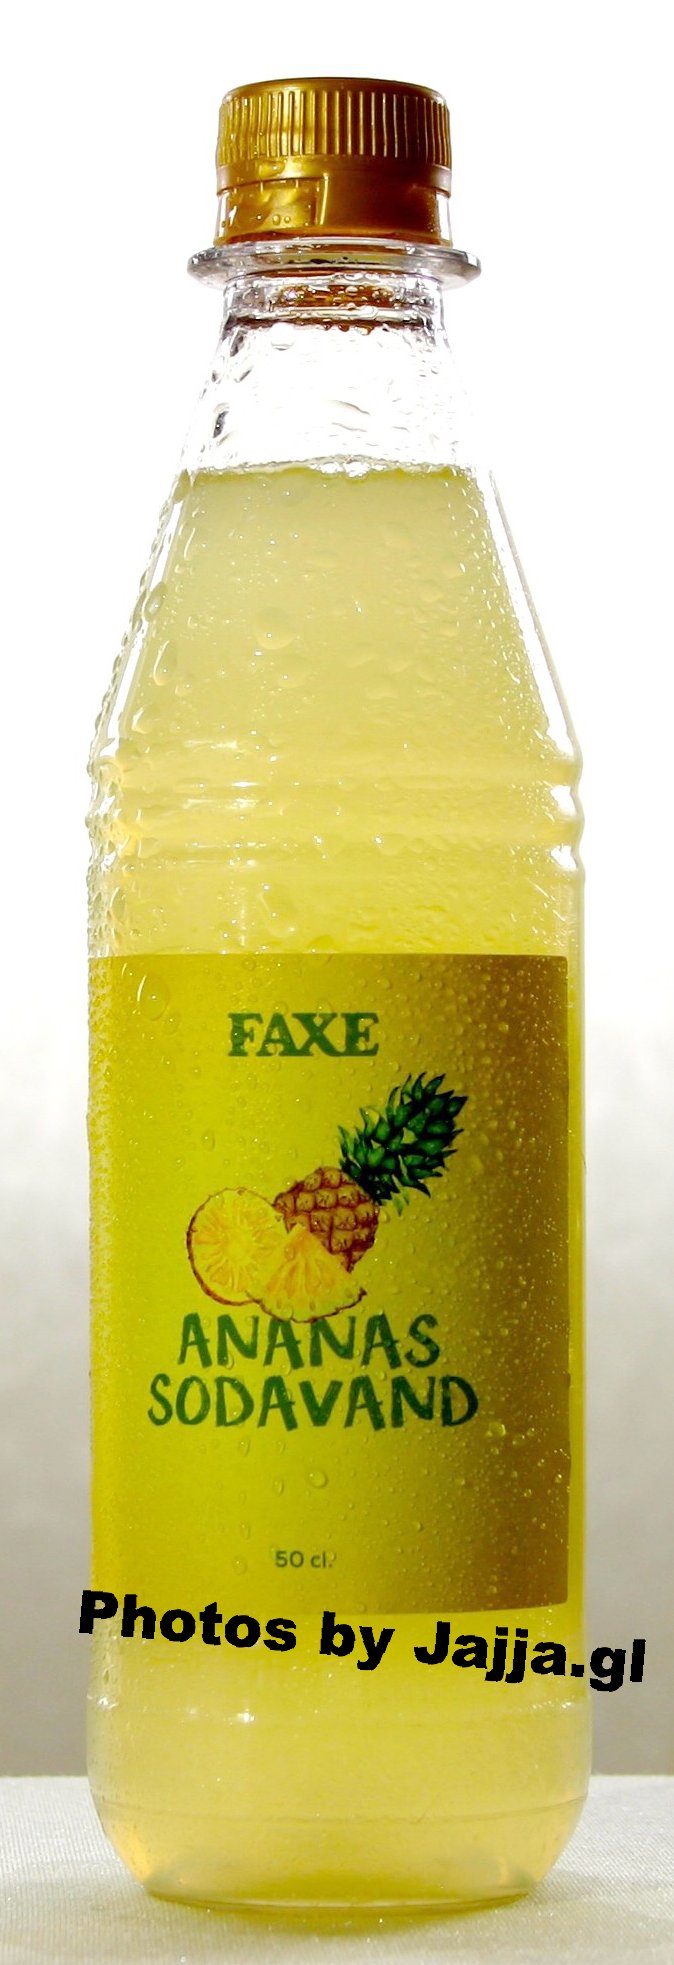 Ananas - Faxe, 50cl (inkl. pant)